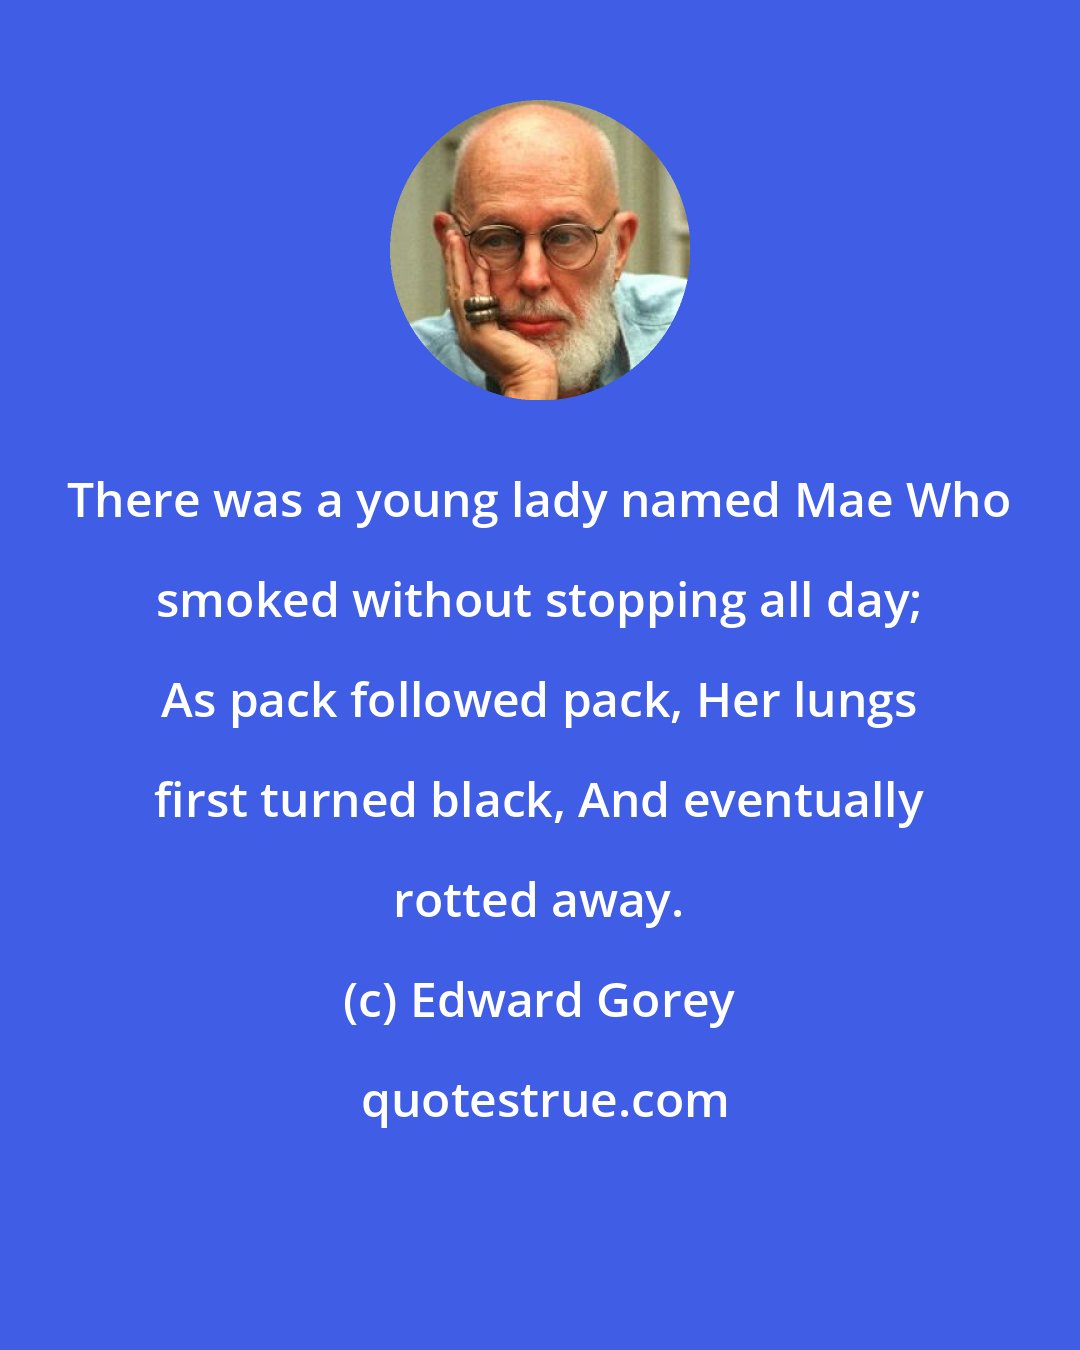 Edward Gorey: There was a young lady named Mae Who smoked without stopping all day; As pack followed pack, Her lungs first turned black, And eventually rotted away.